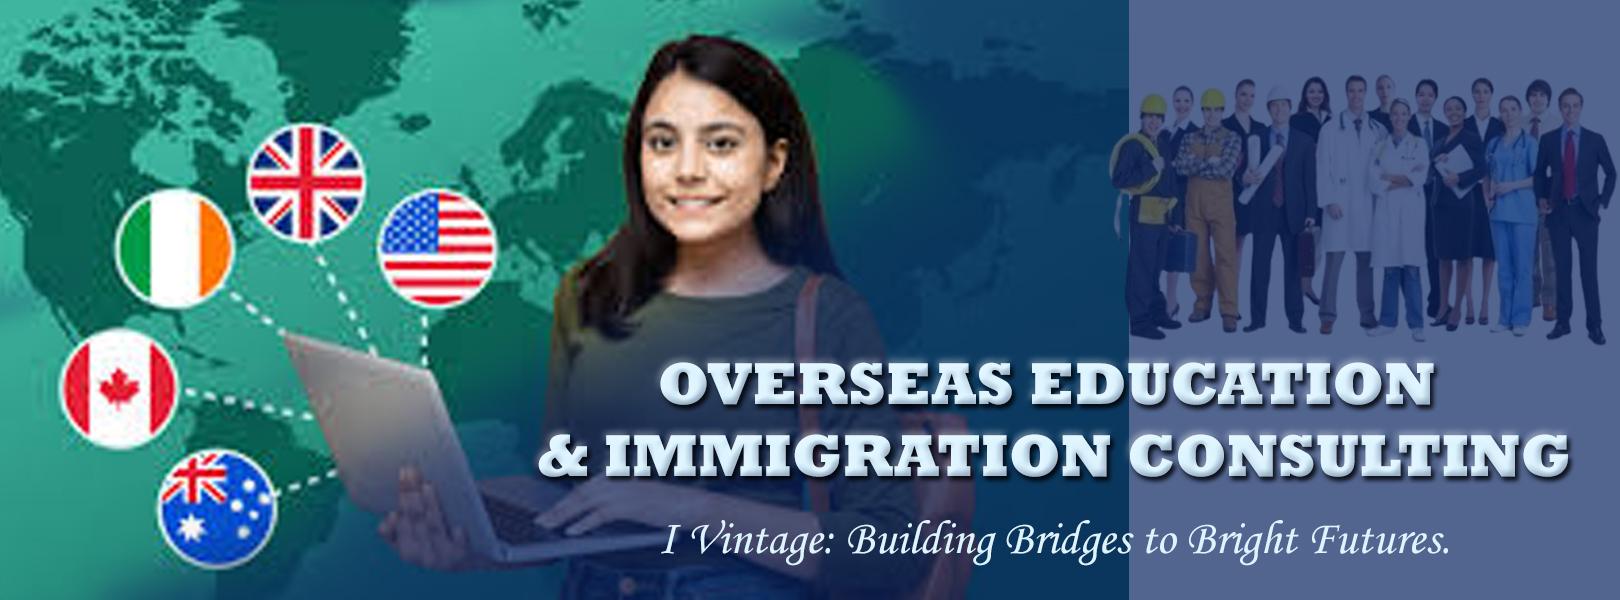 study abroad & immigration